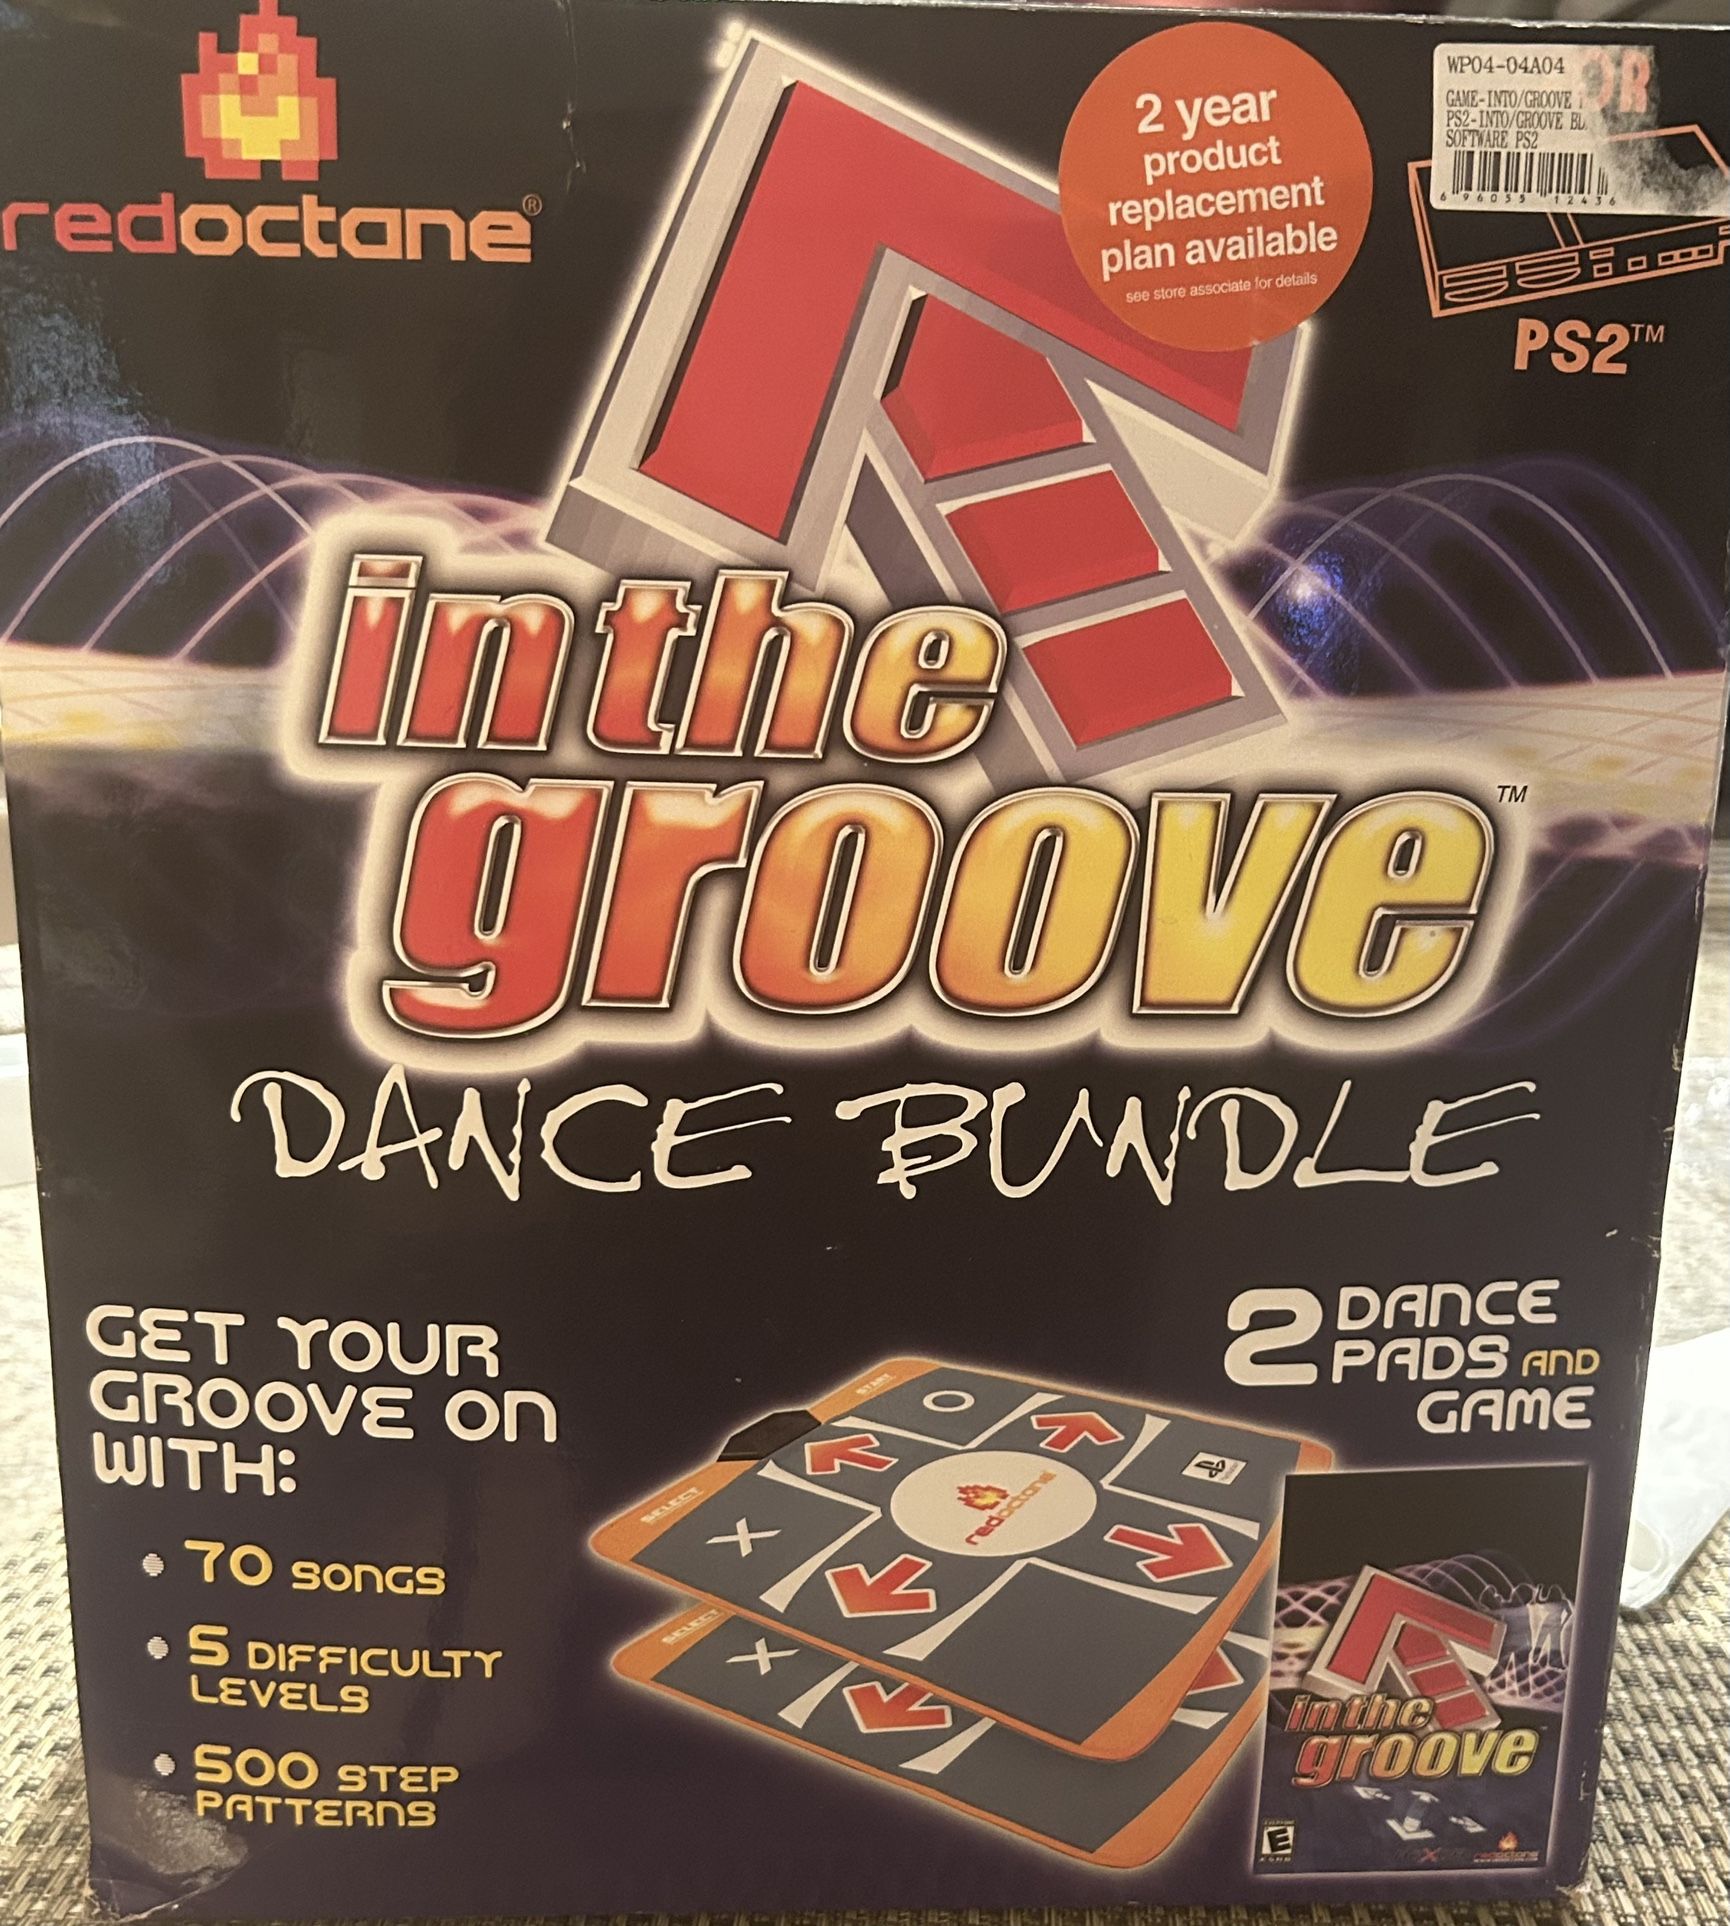 In the groove dance pads (2) and game for PS2 brand new